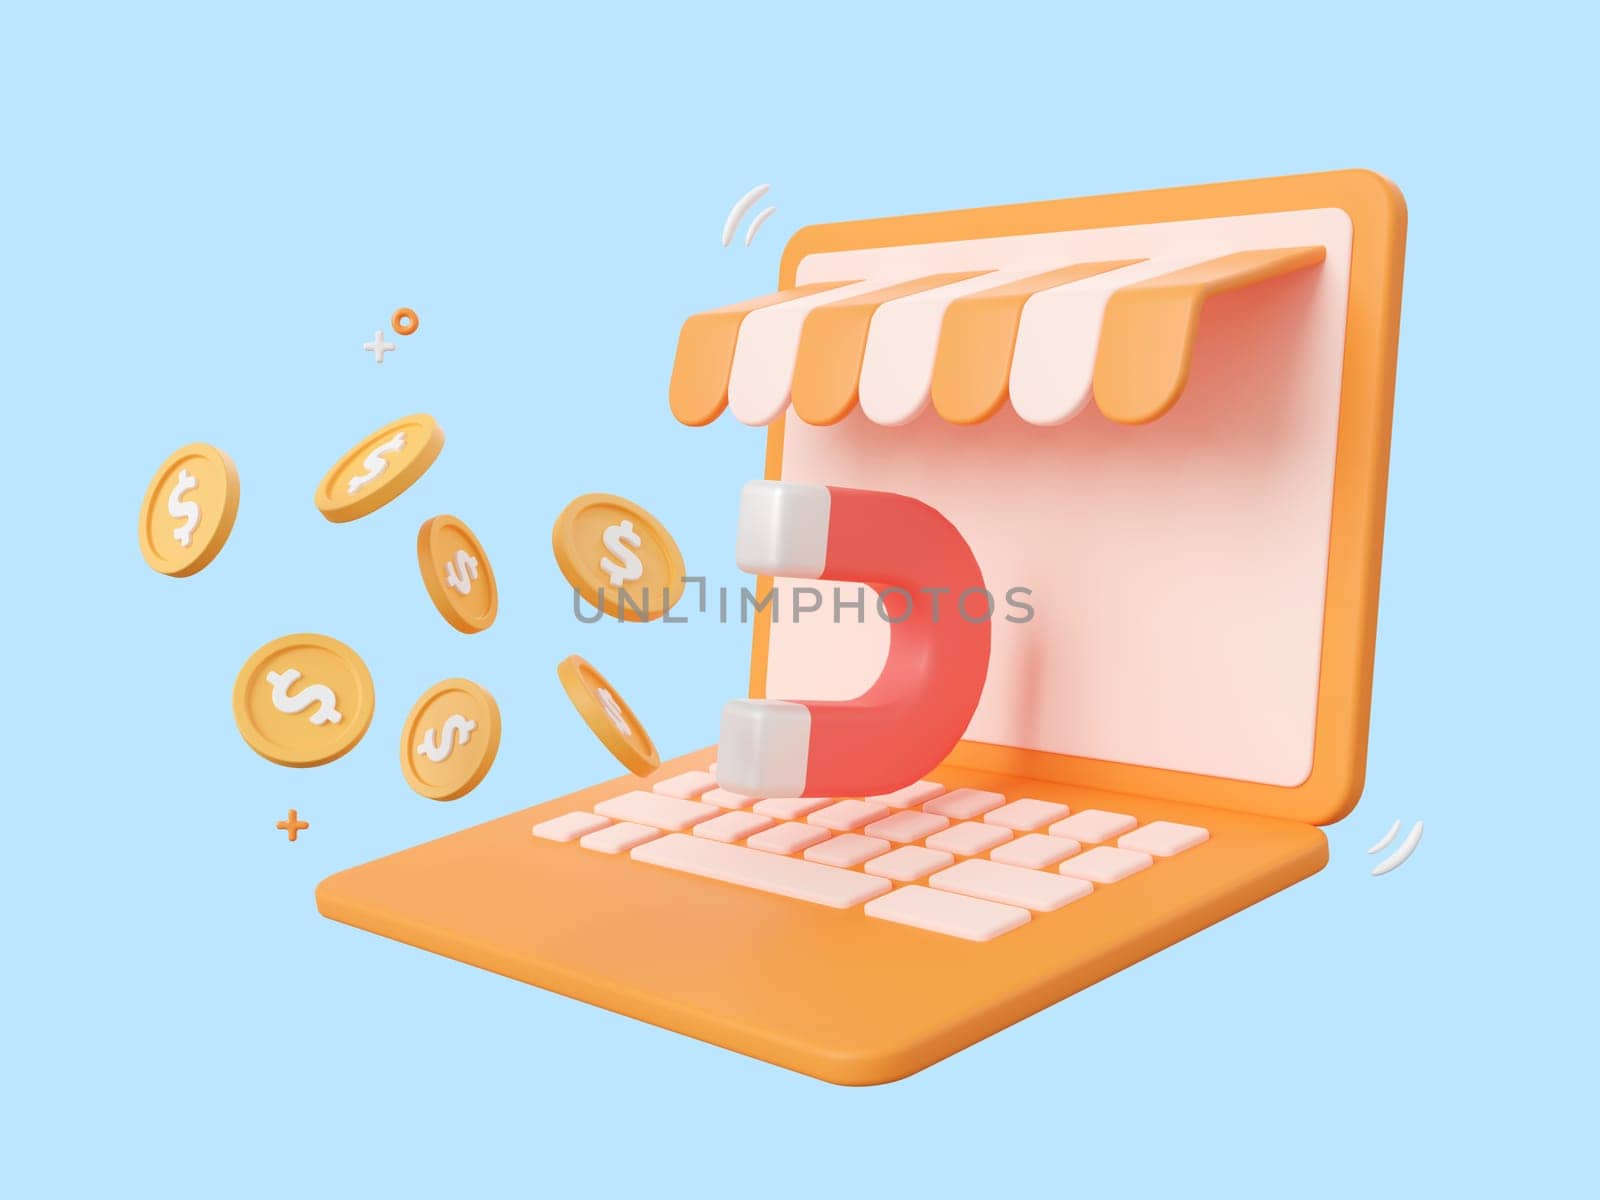 3d cartoon design illustration of Laptop store with magnet attracts gold coins.